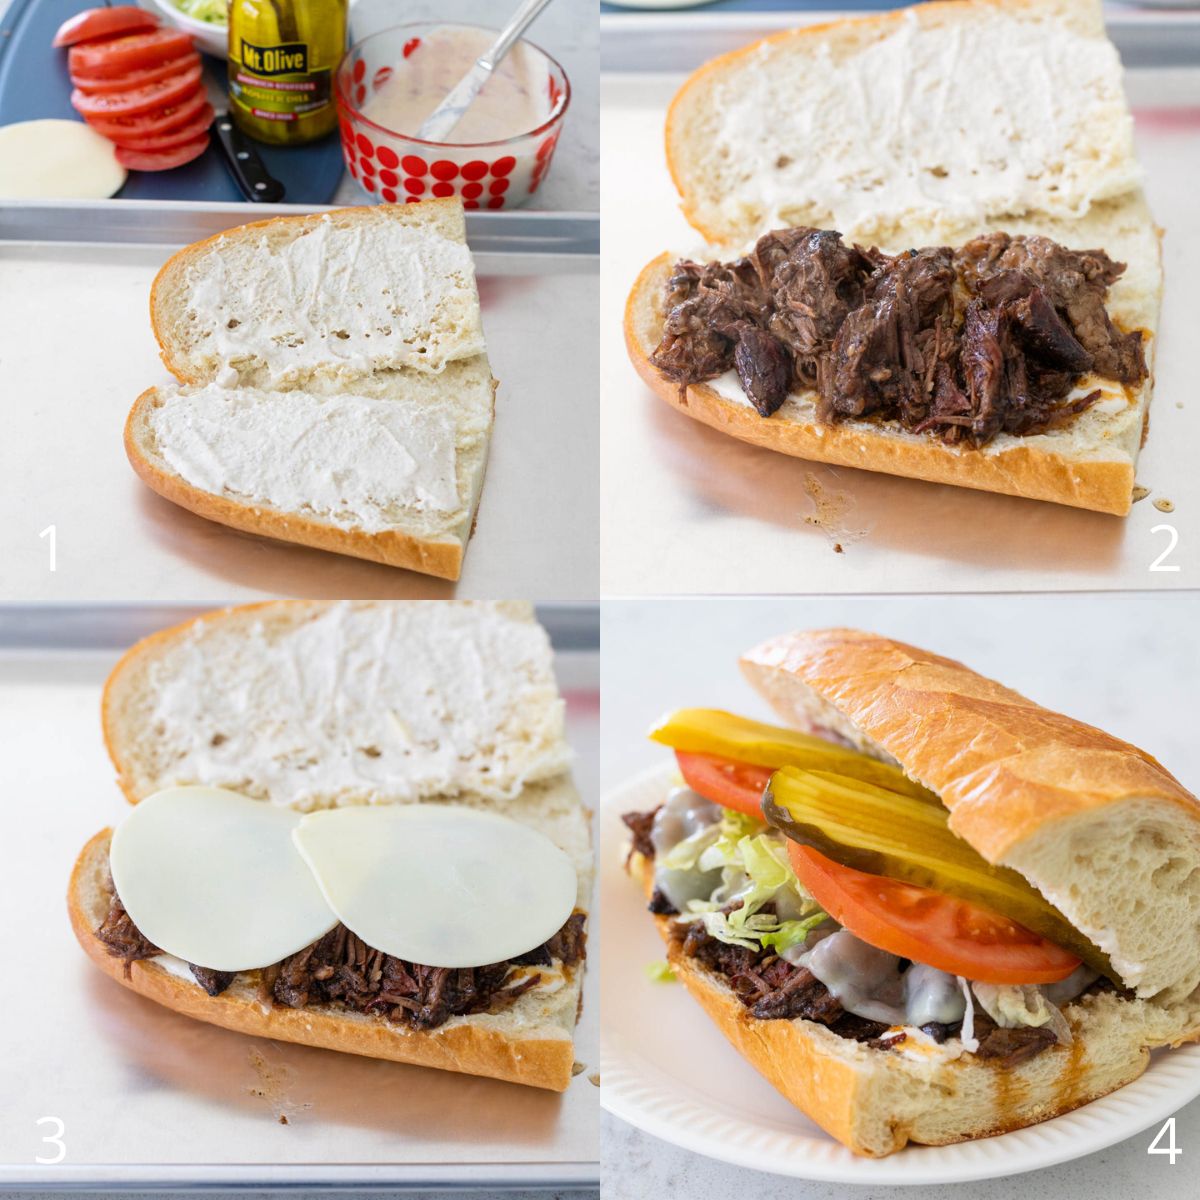 The step by step photos show how to spread the horseradish sauce, top with beef, top with cheese and bake, and add the lettuce, tomatoes, and pickles.